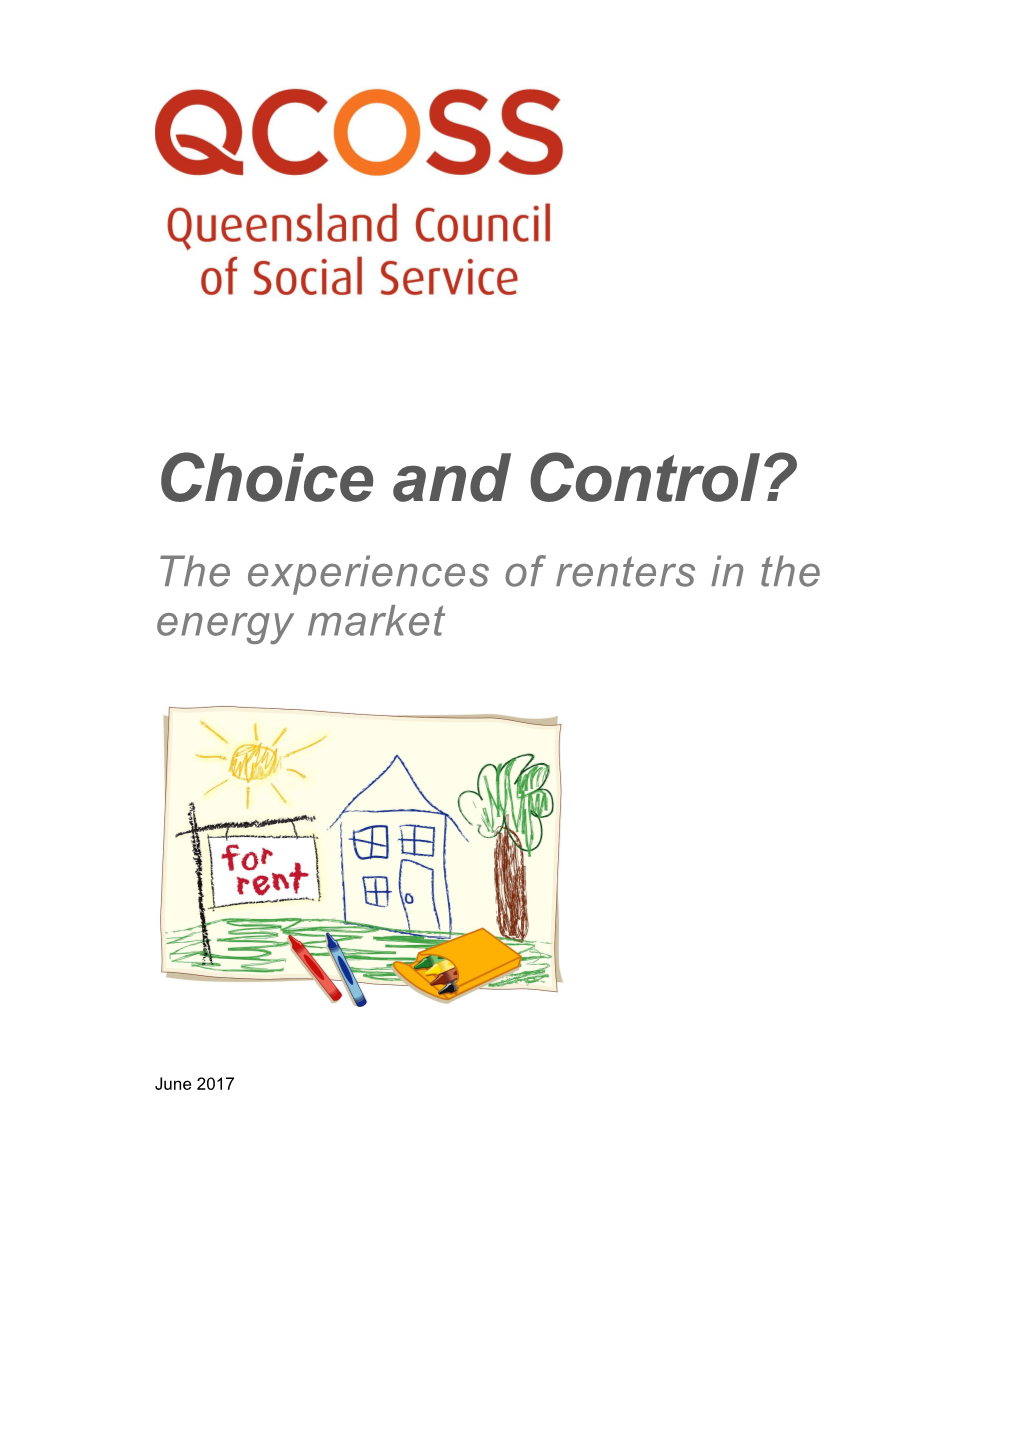 Choice And Control - The Experience Of Renters In The Energy Market